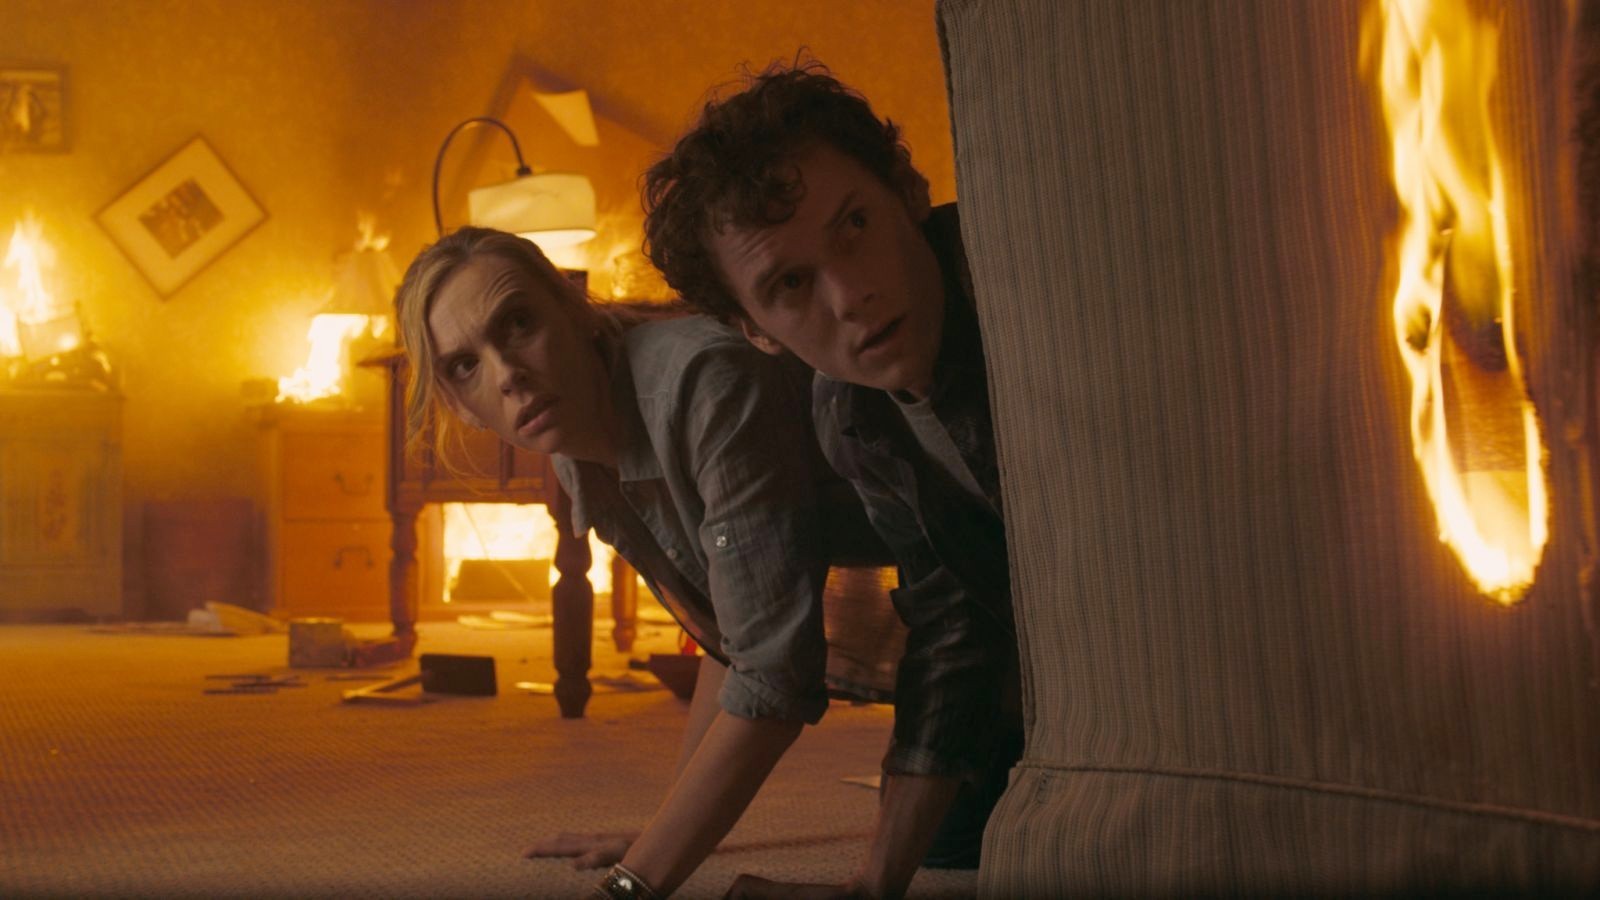 Toni Collette stars as Jane Brewster and Anton Yelchin stars as Charley Brewster in DreamWorks SKG's Fright Night (2011)